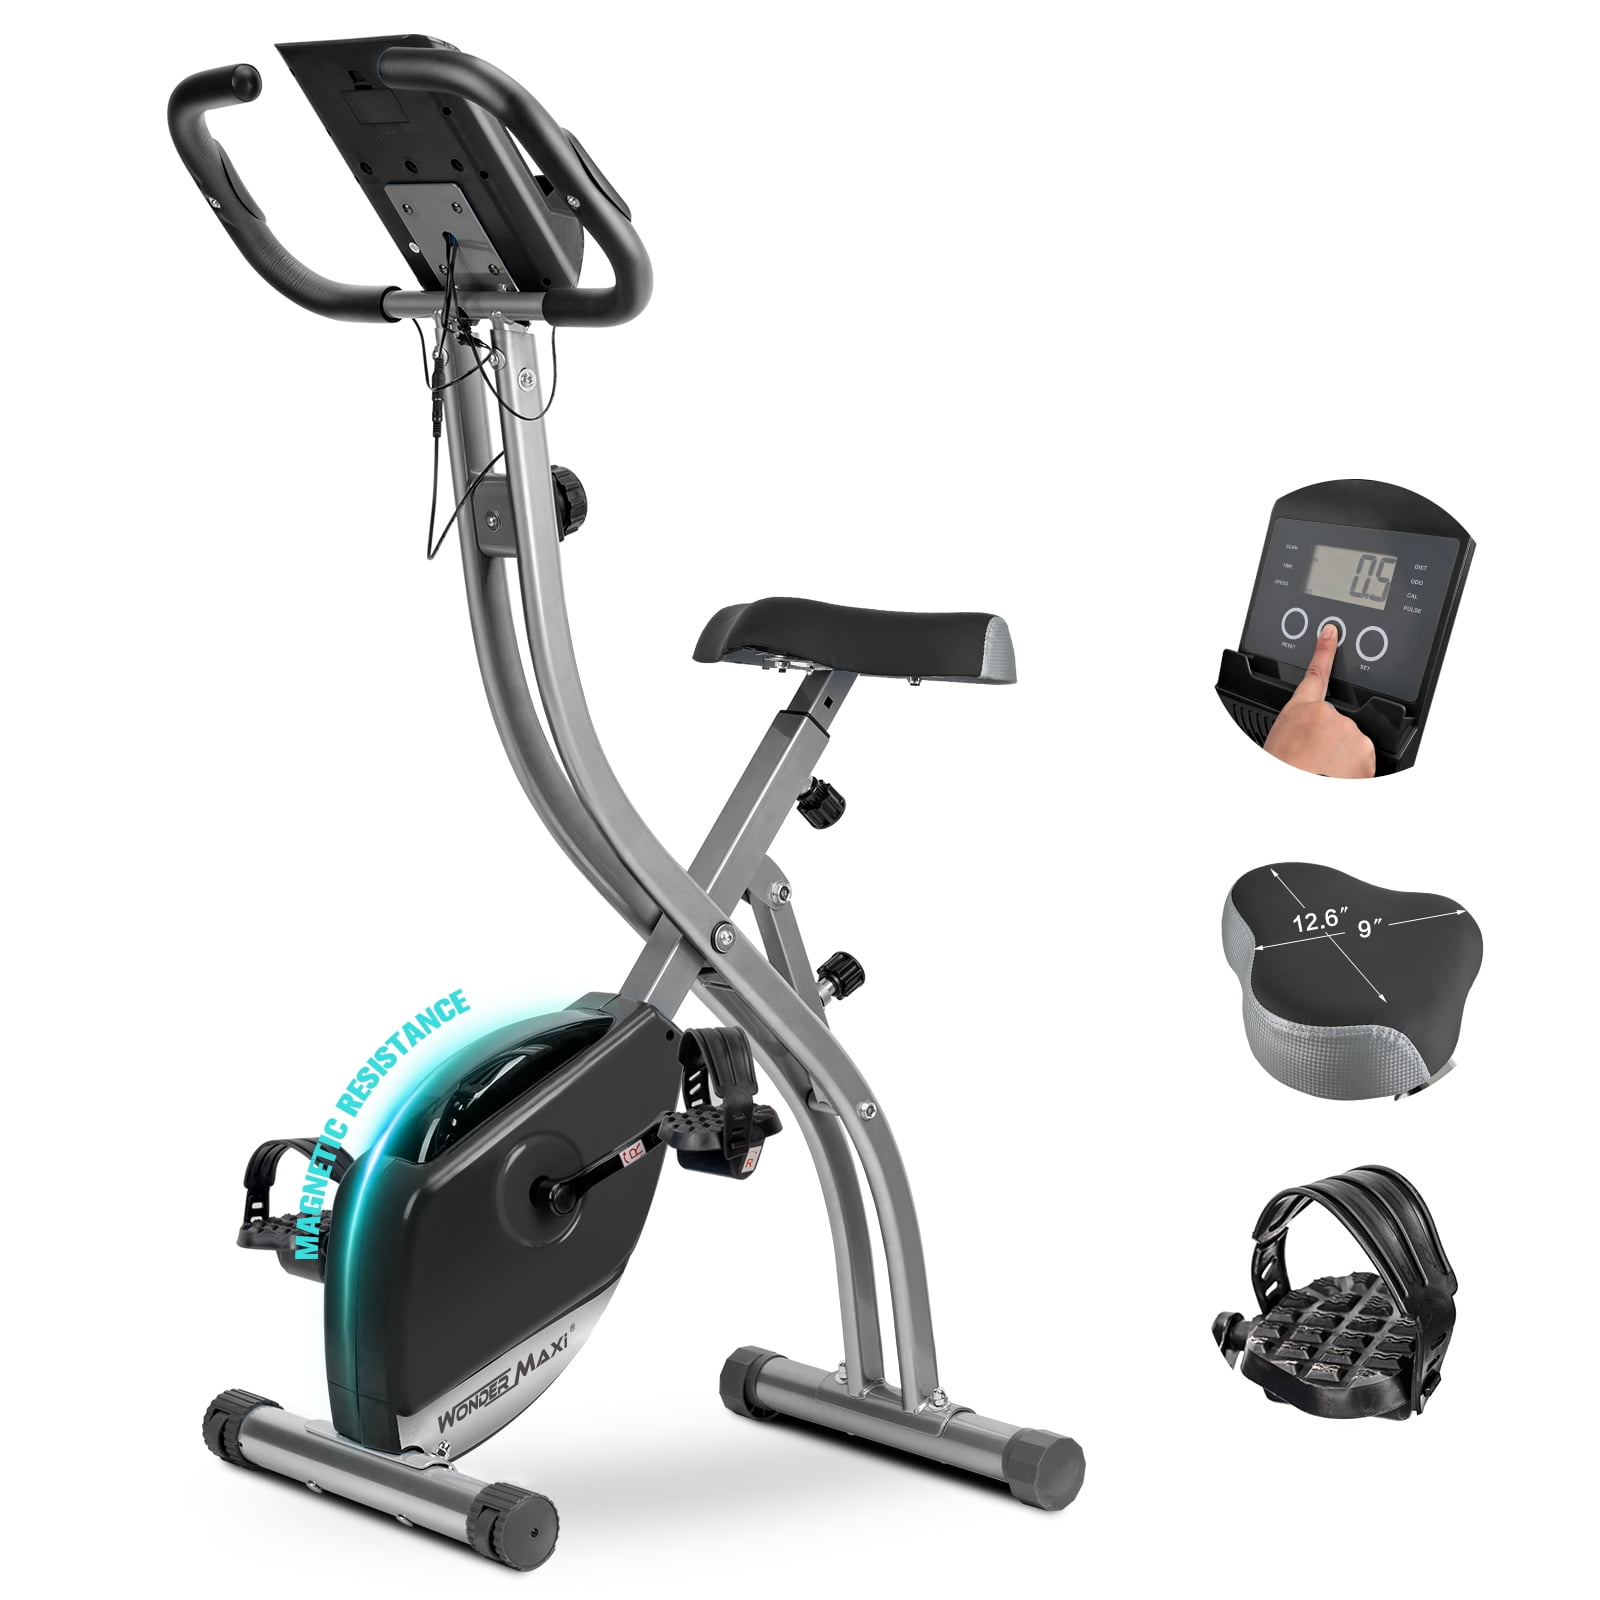 Fitnessclub Folding Exercise Bike Magnetic Resistance Indoor Upright Ultra-Quiet Bicycle Stationary with Heart Rate,LCD Monitor,Cup Holder,Elastic Rope & Phone Mount for Home Cardio Workout Training 